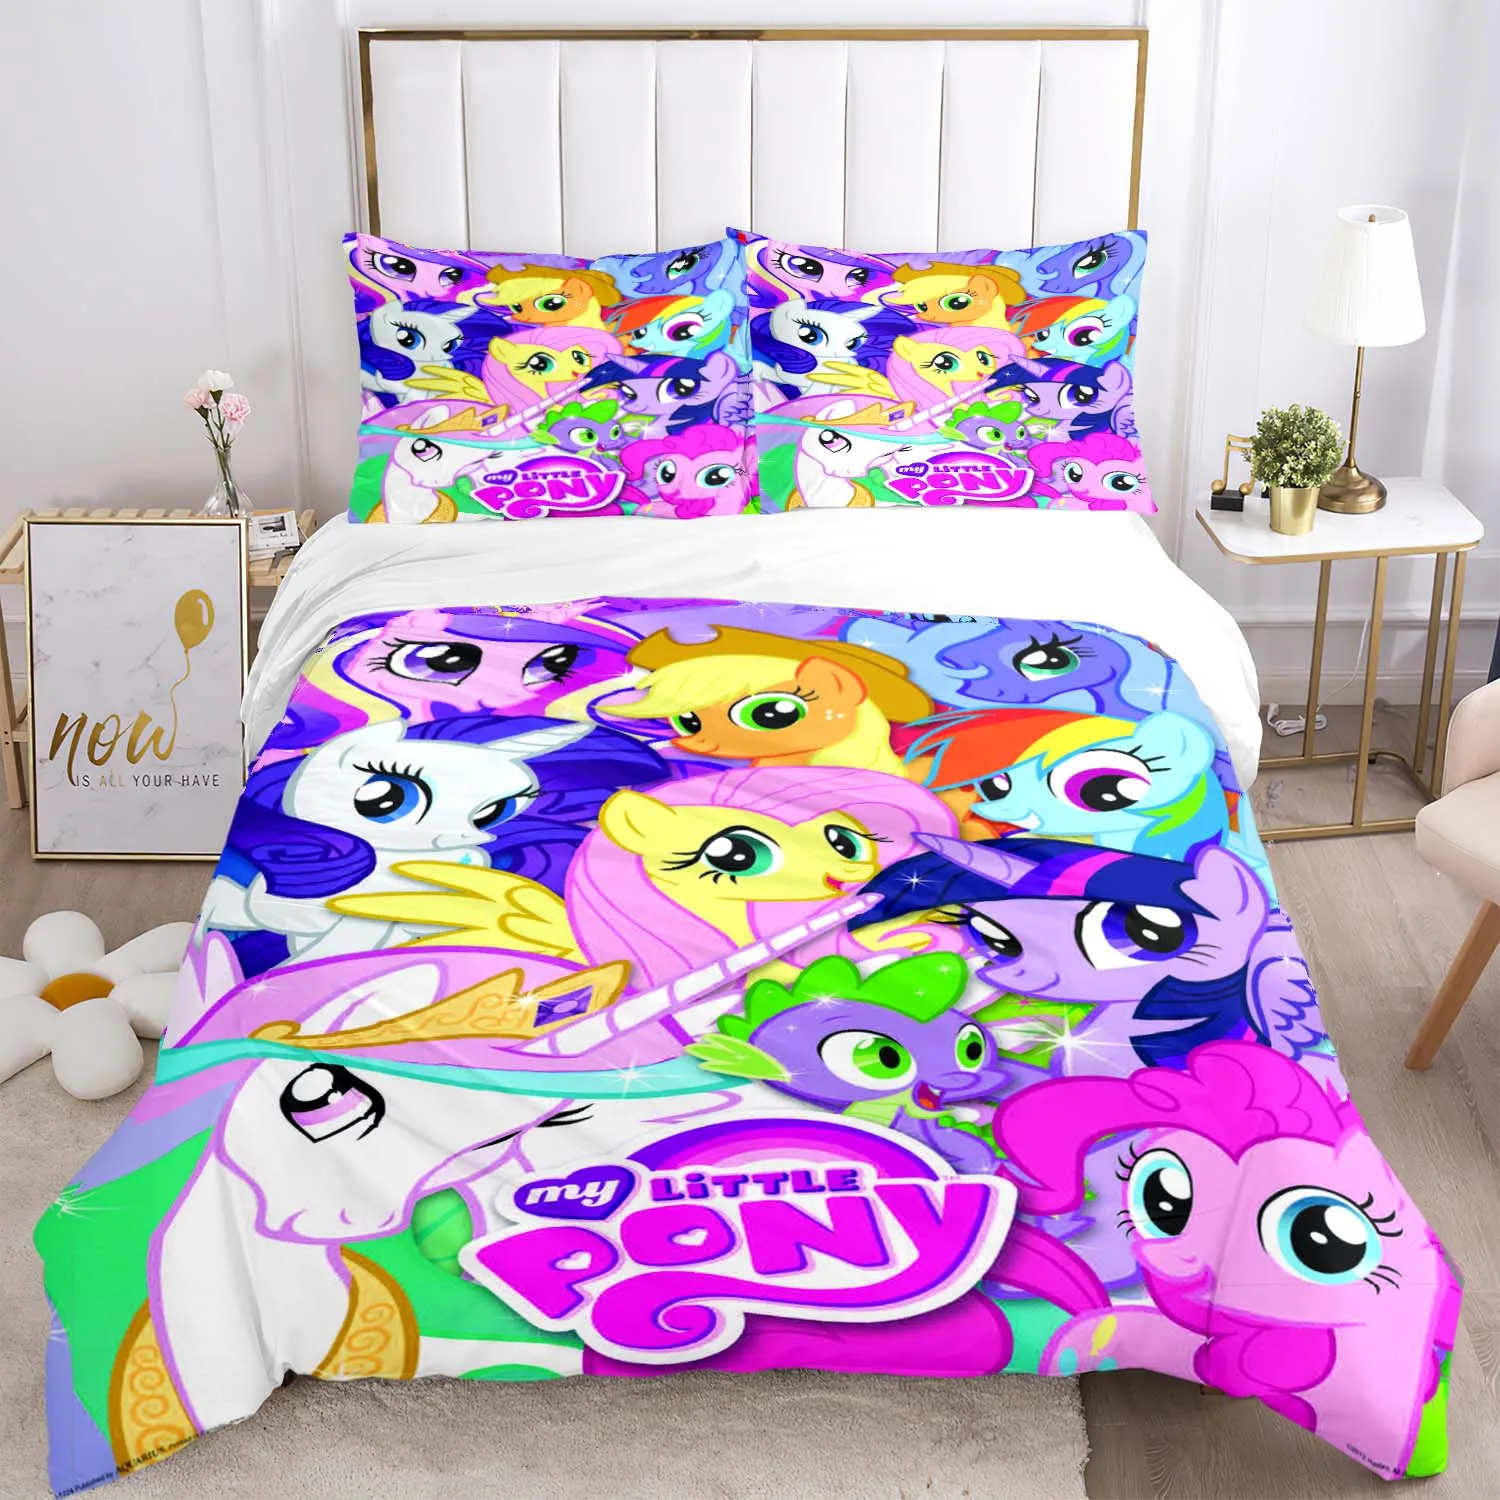 

Rainbow Unicorn Pony 3D printed bedding duvet cover Queen bedding set Soft and comfortable customized King size bedding set